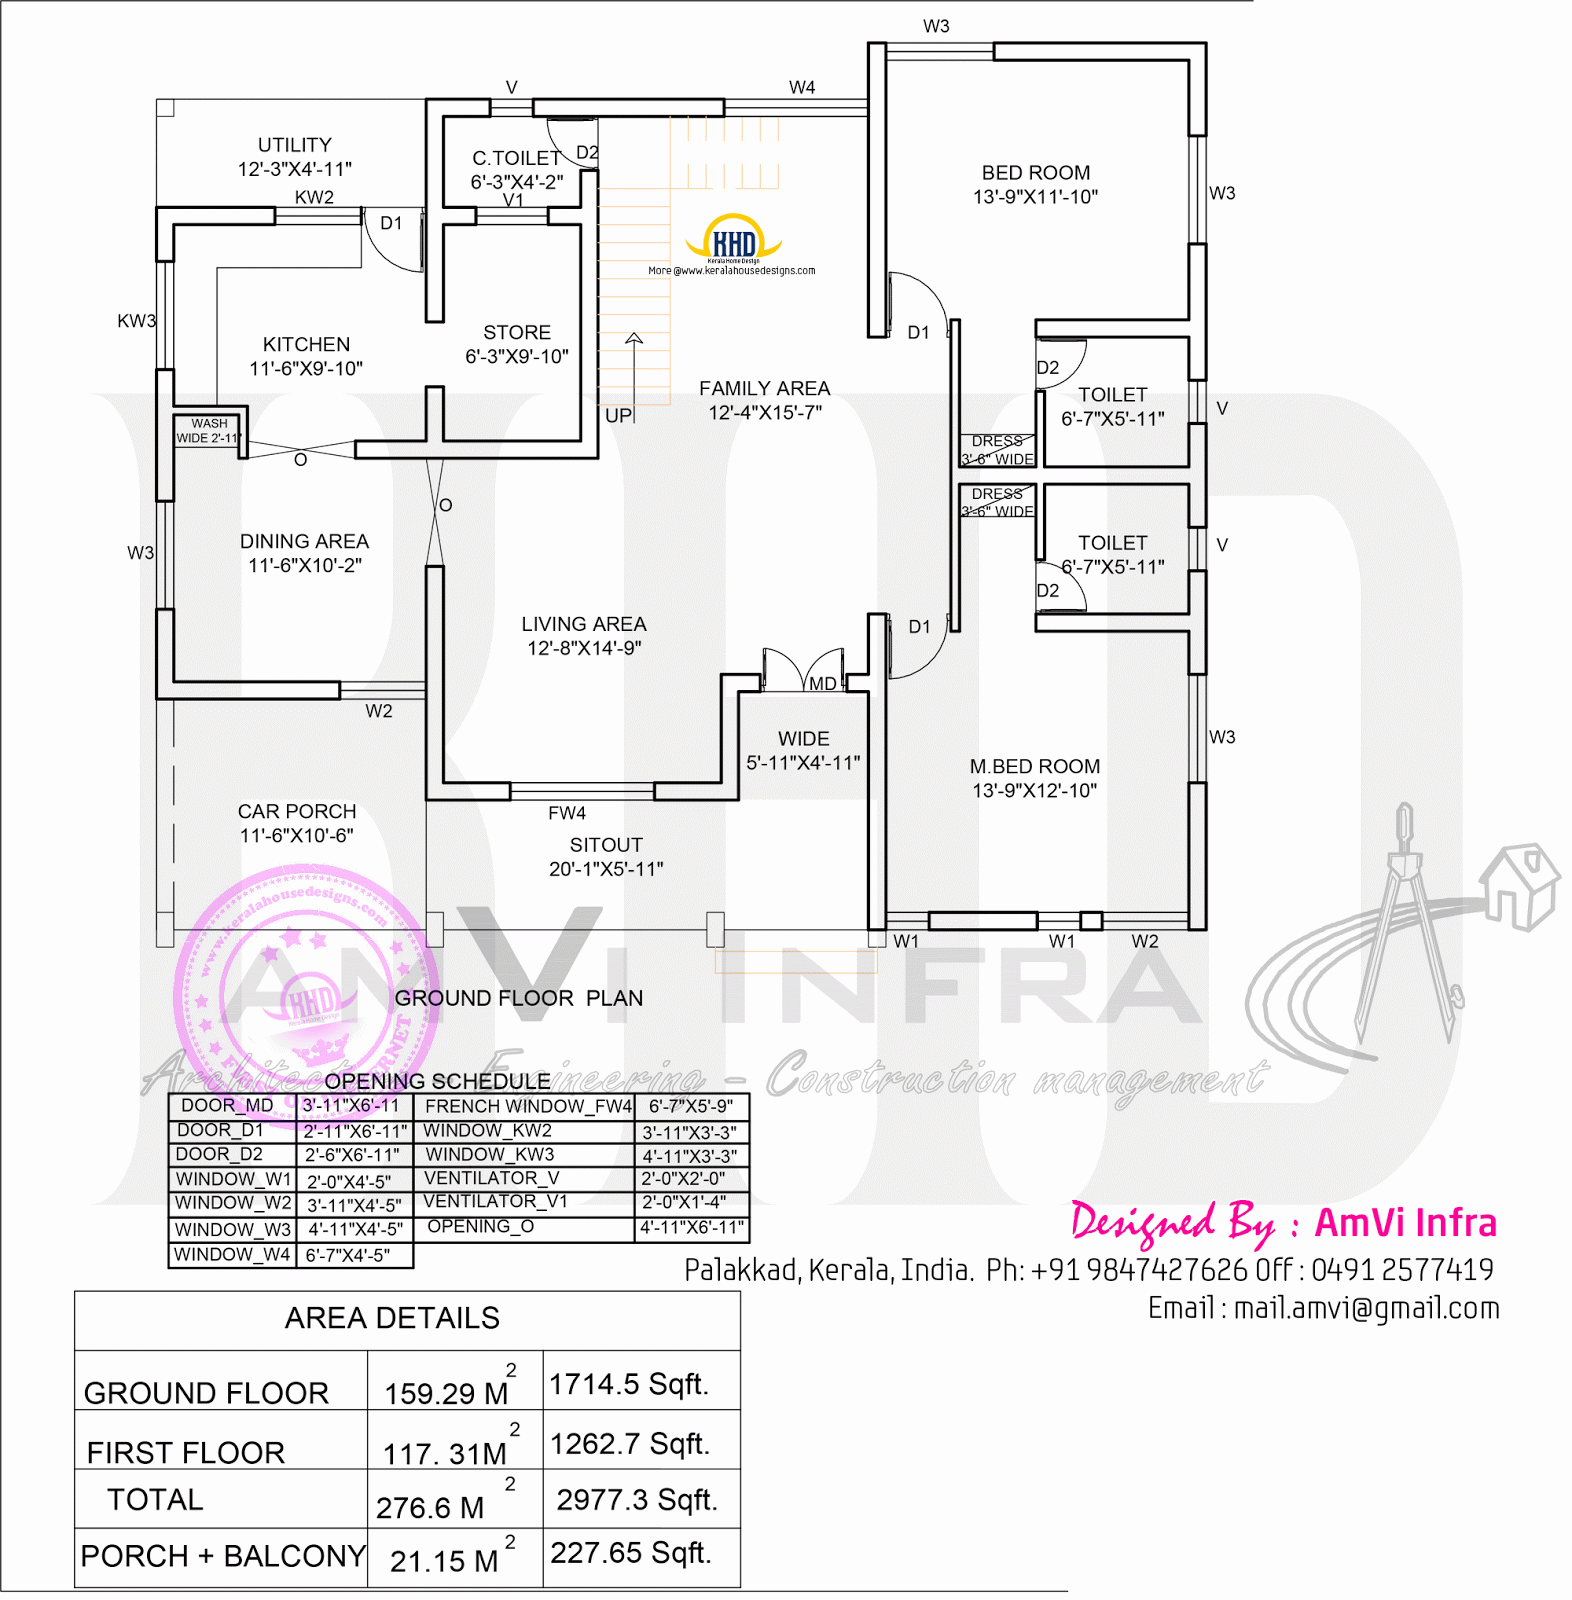  5  bedroom  house  elevation with floor plan  Home  Kerala  Plans 